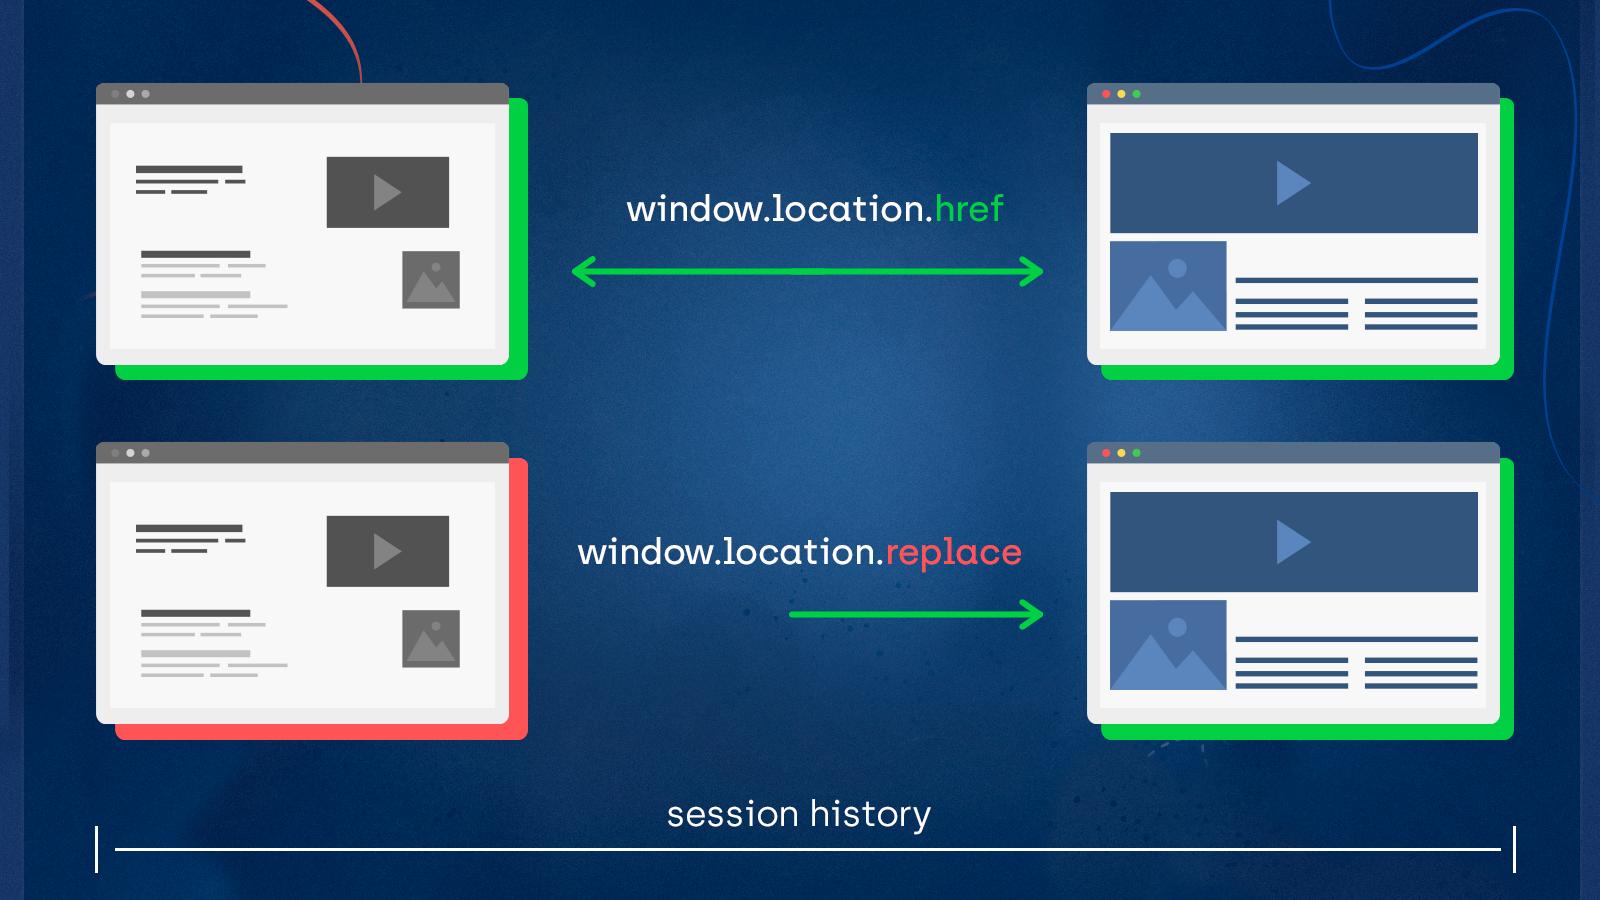 The difference between window.location.href and window.location.replace methods is that you with window.location.replace, the page is removed from session history.